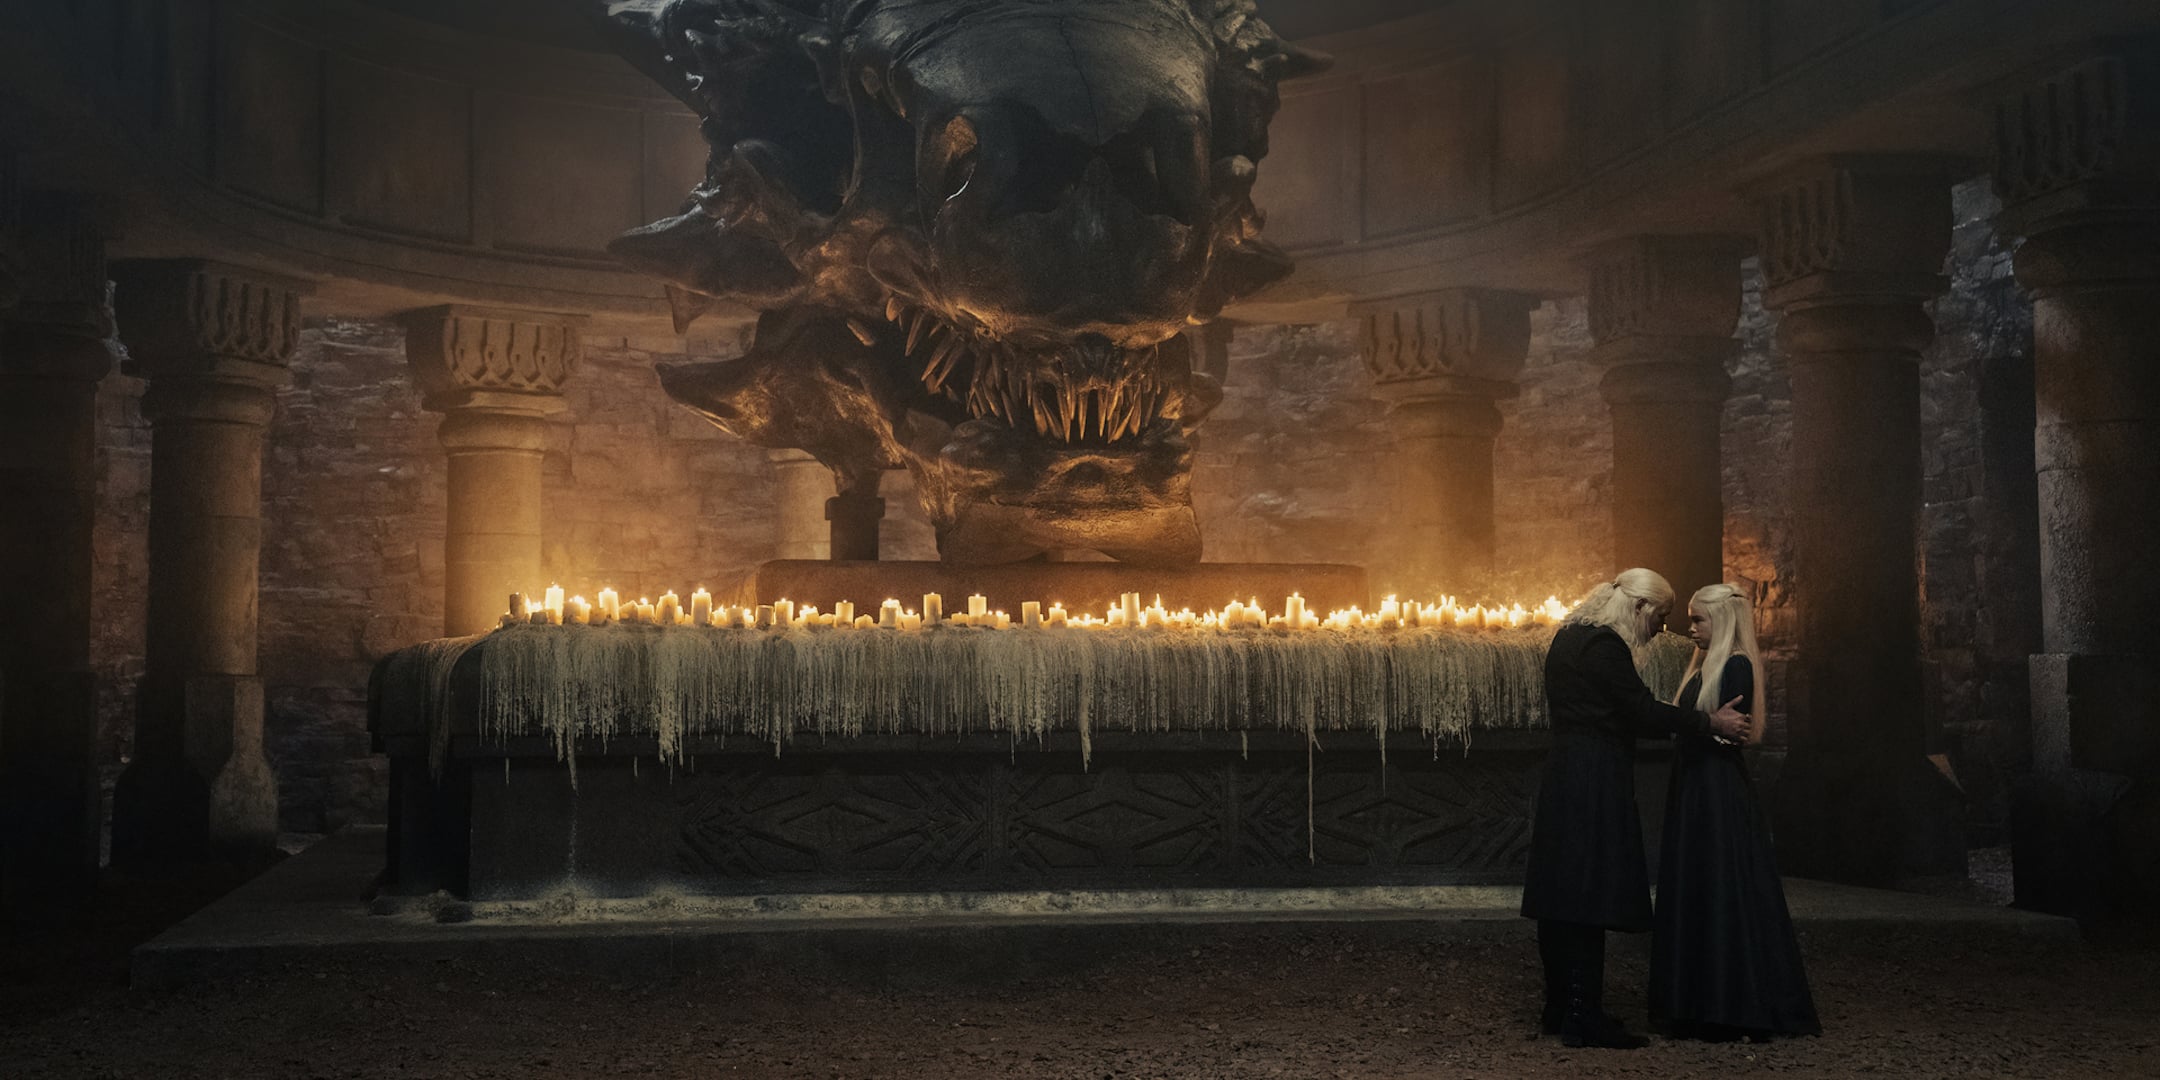 House of the Dragon' Episode 1 Breakdown: Dreams and Prophecies